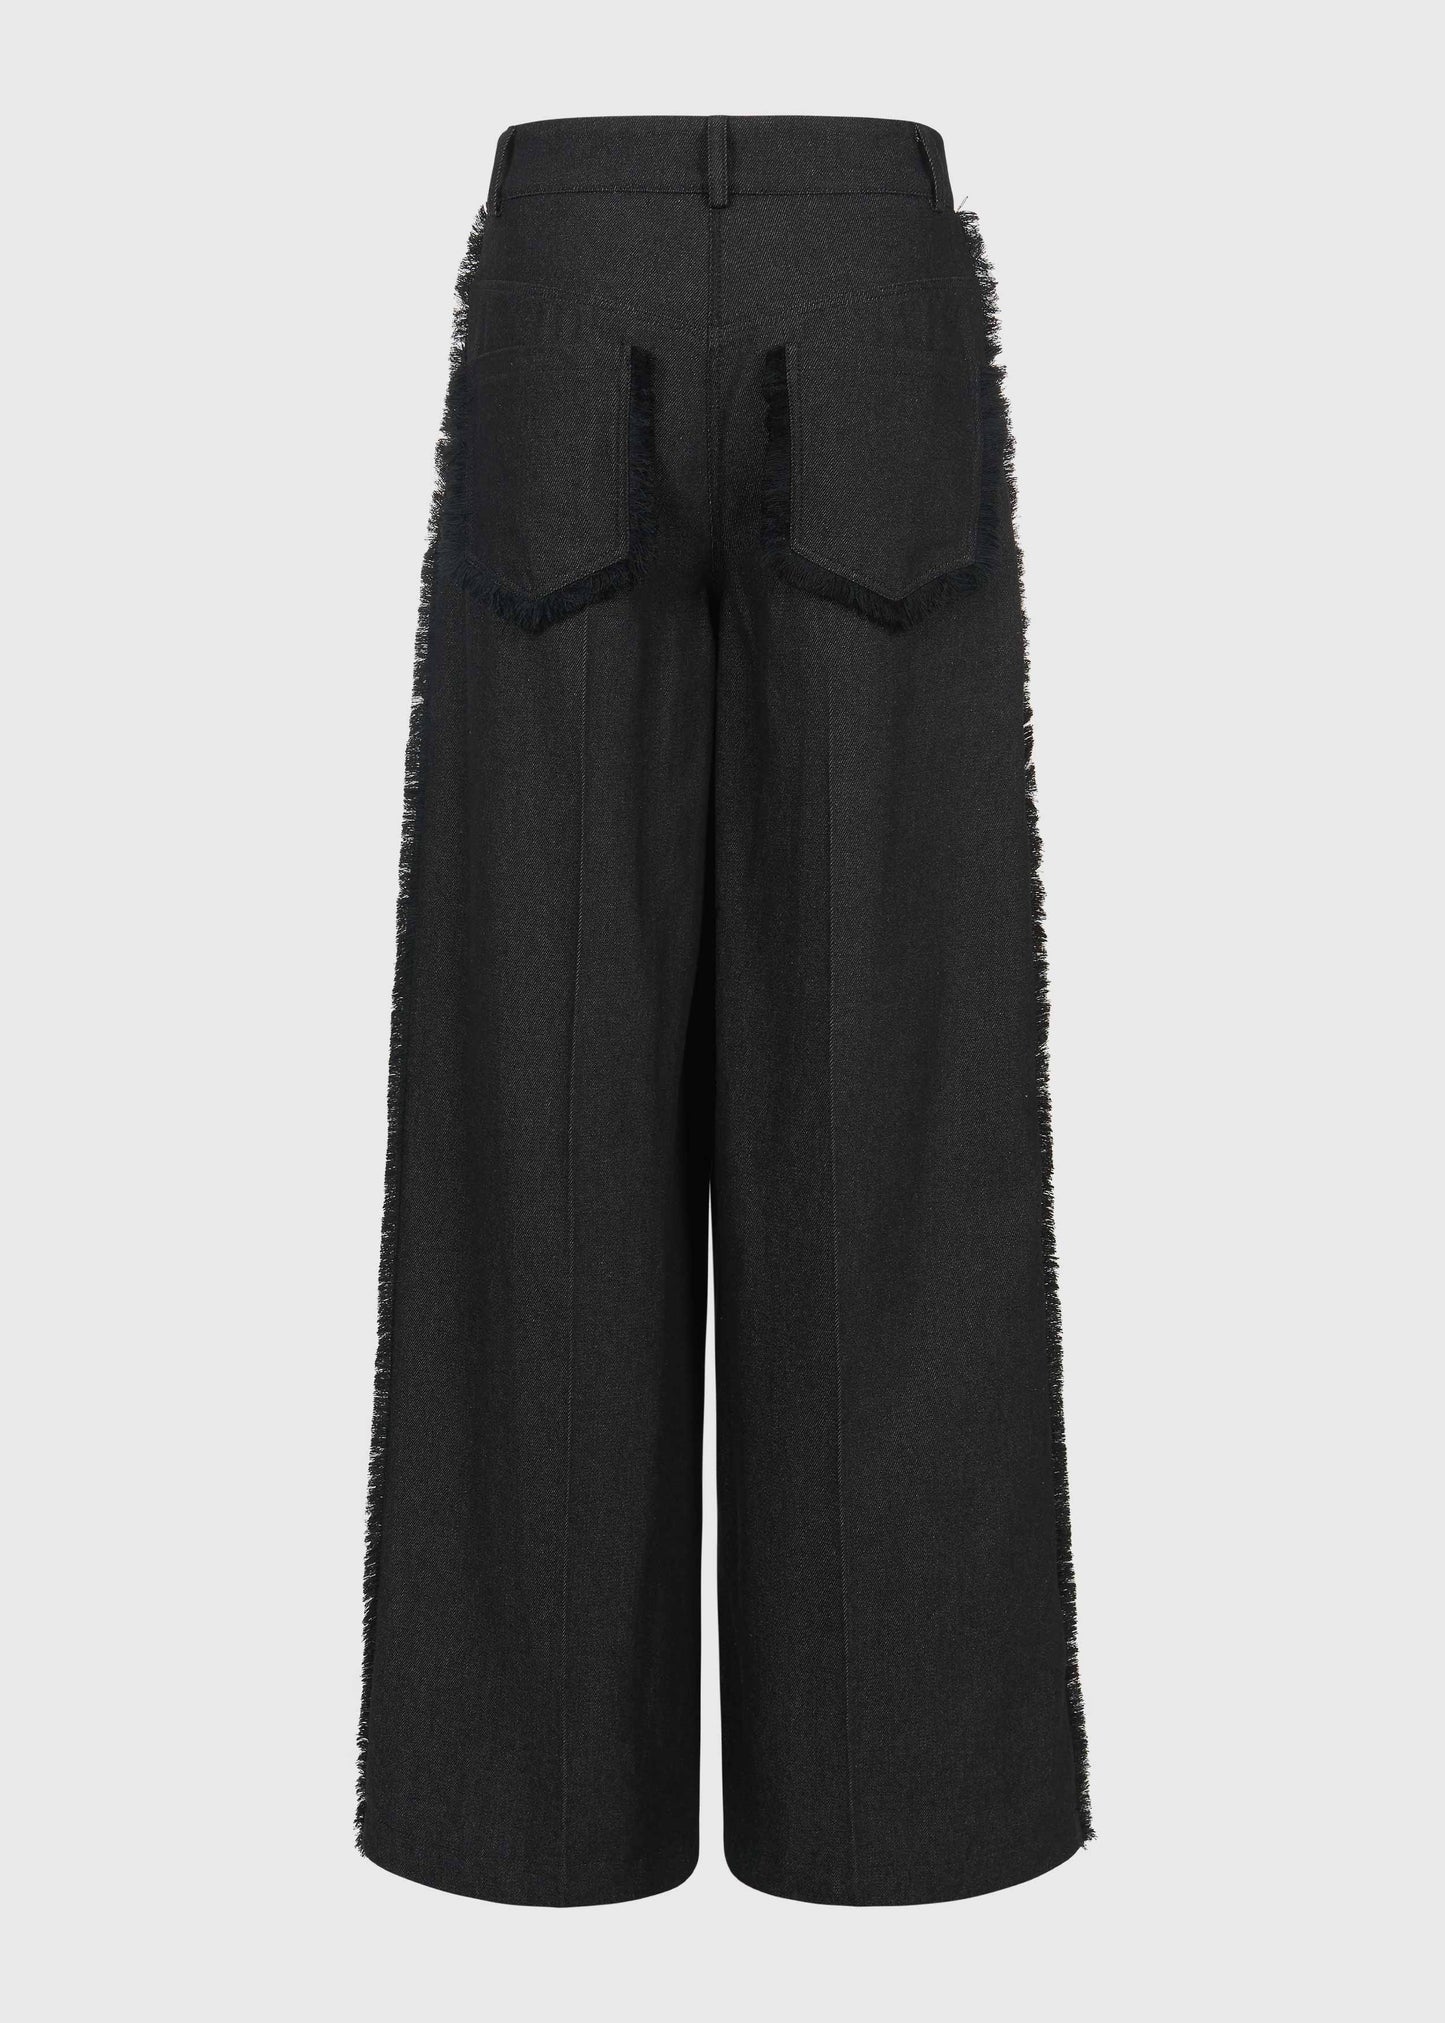 Midnight Trails Fringe Trousers